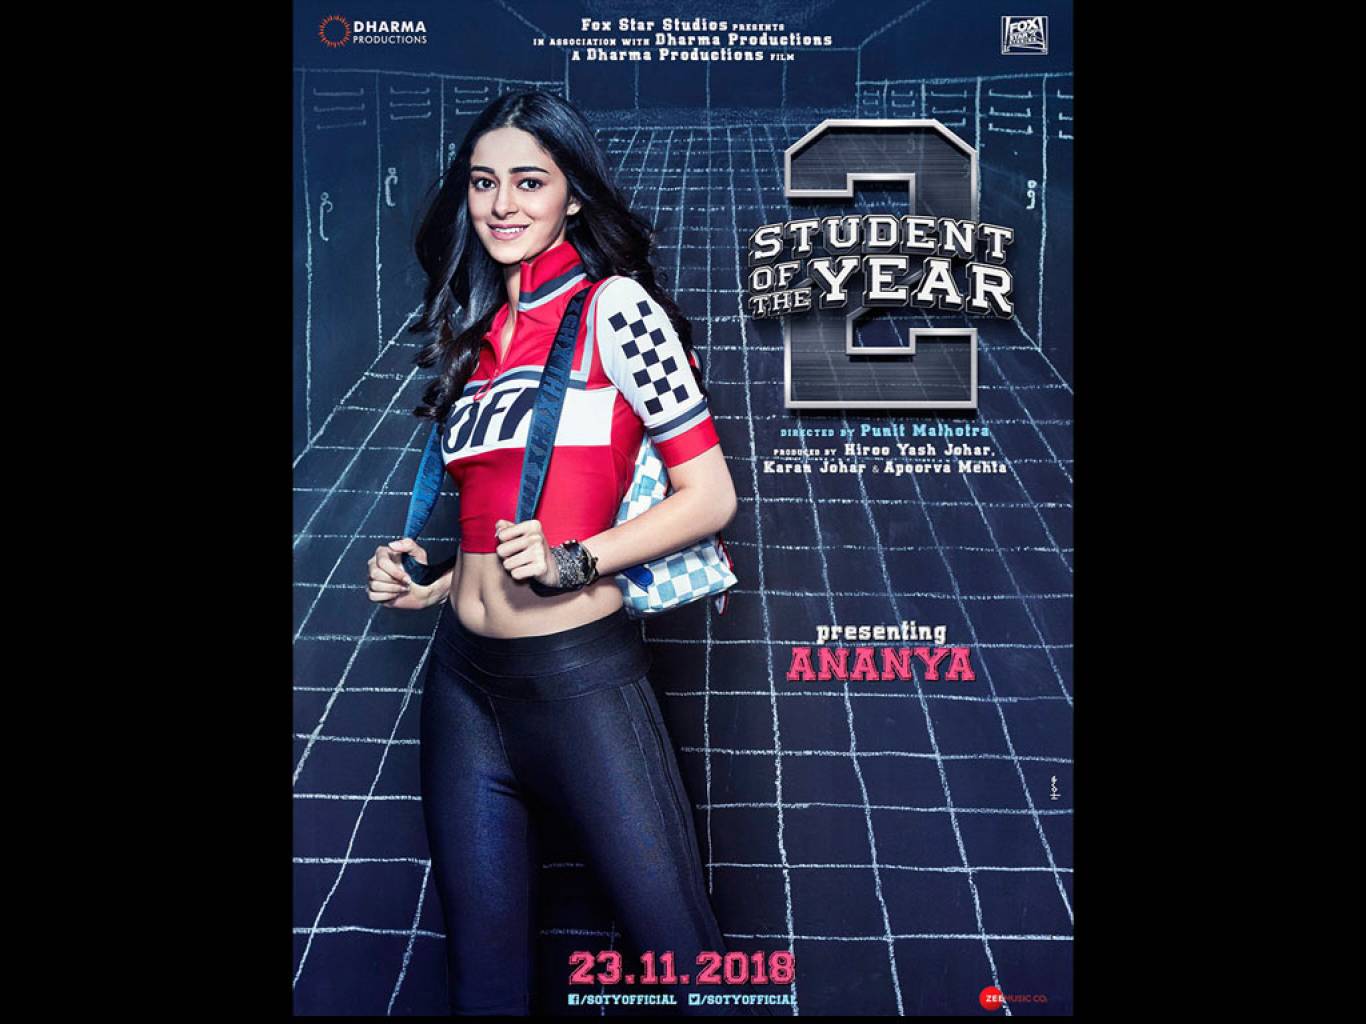 Student Of The Year 2 Movie HD Wallpaper. Student Of The Year 2 HD Movie Wallpaper Free Download (1080p to 2K)